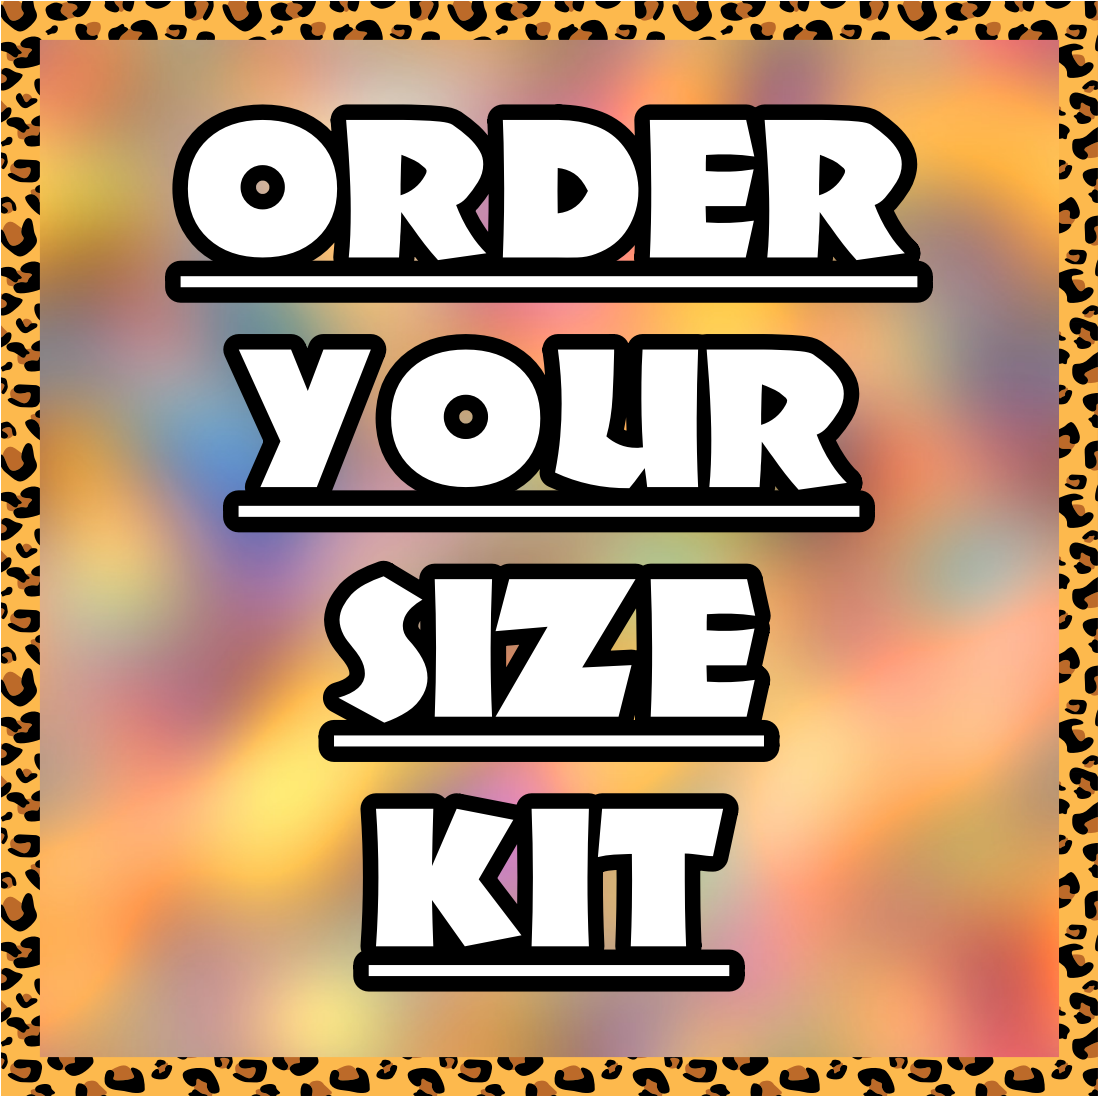 'Order Your Size Kit'